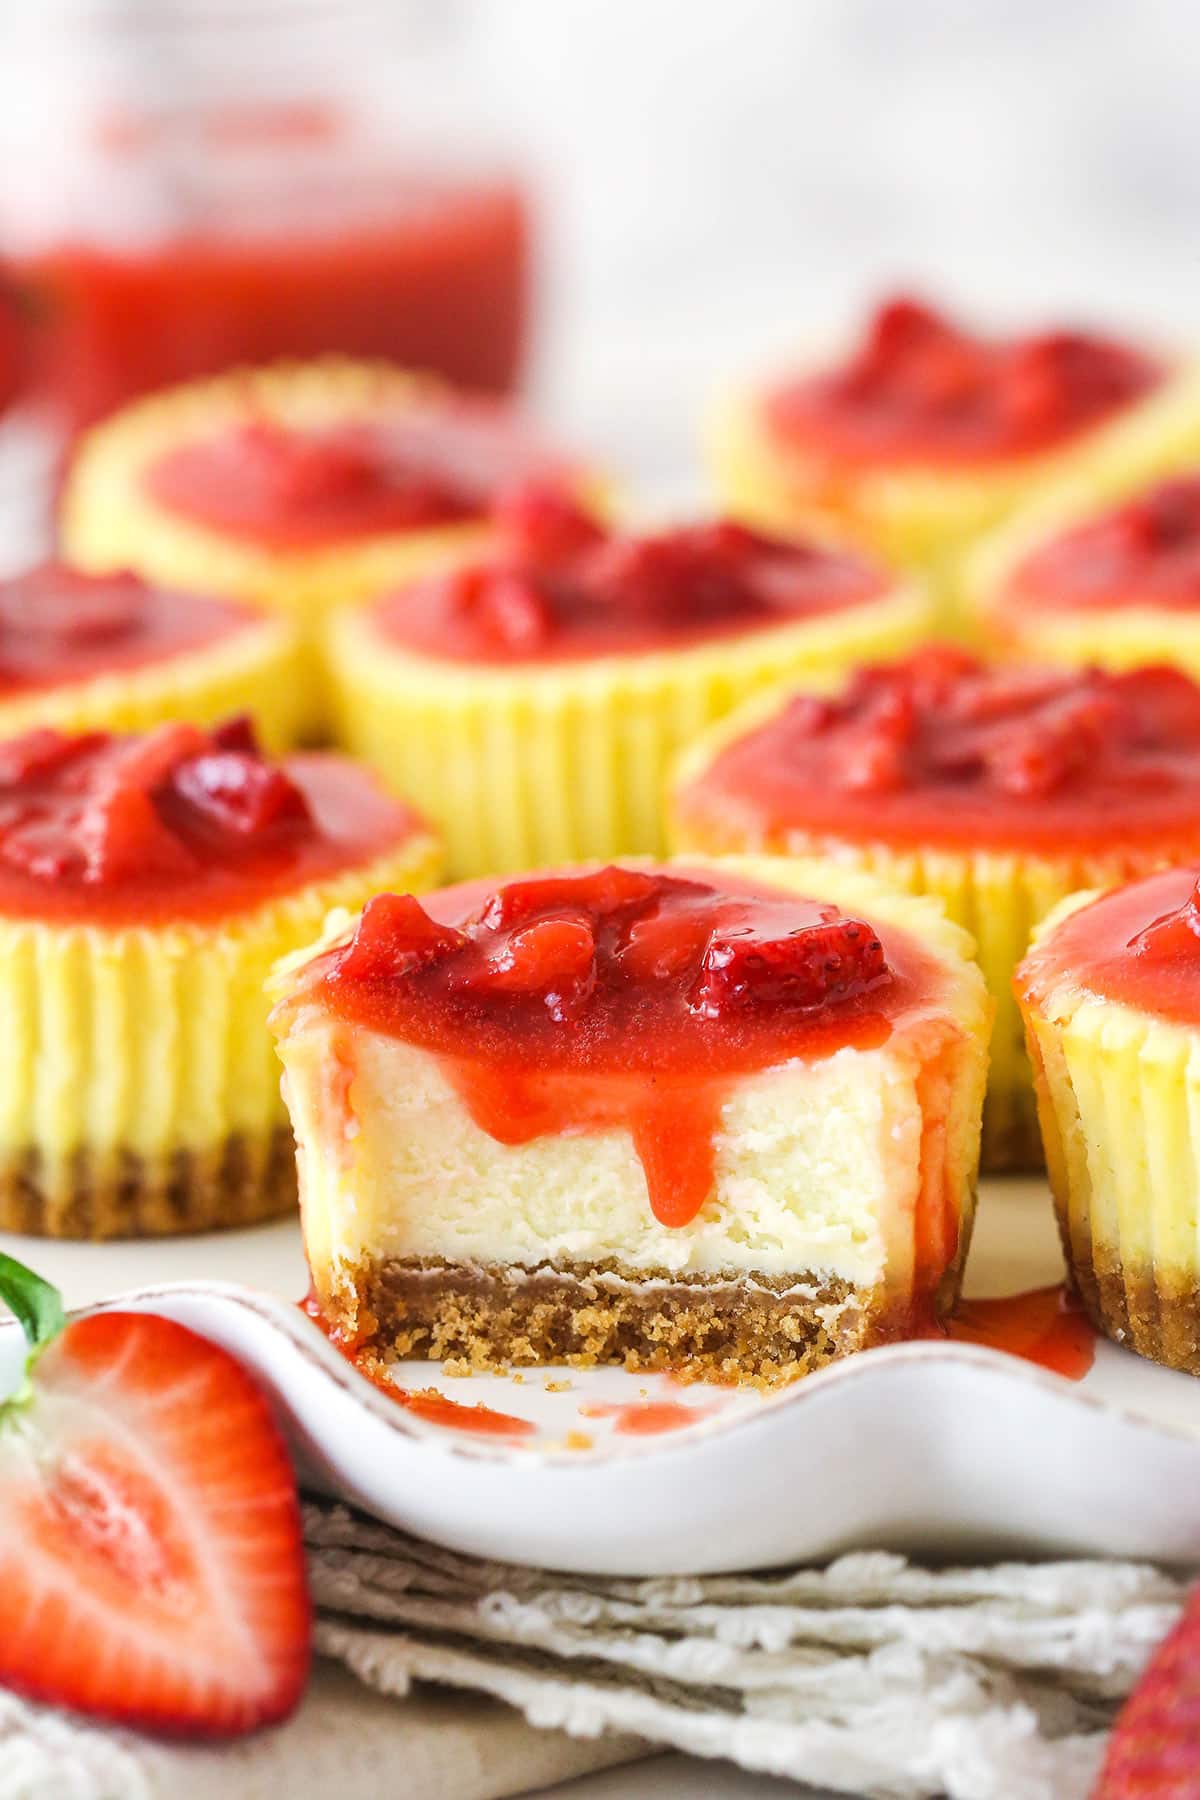 A mini strawberry cheesecake with a bite taken out of it.